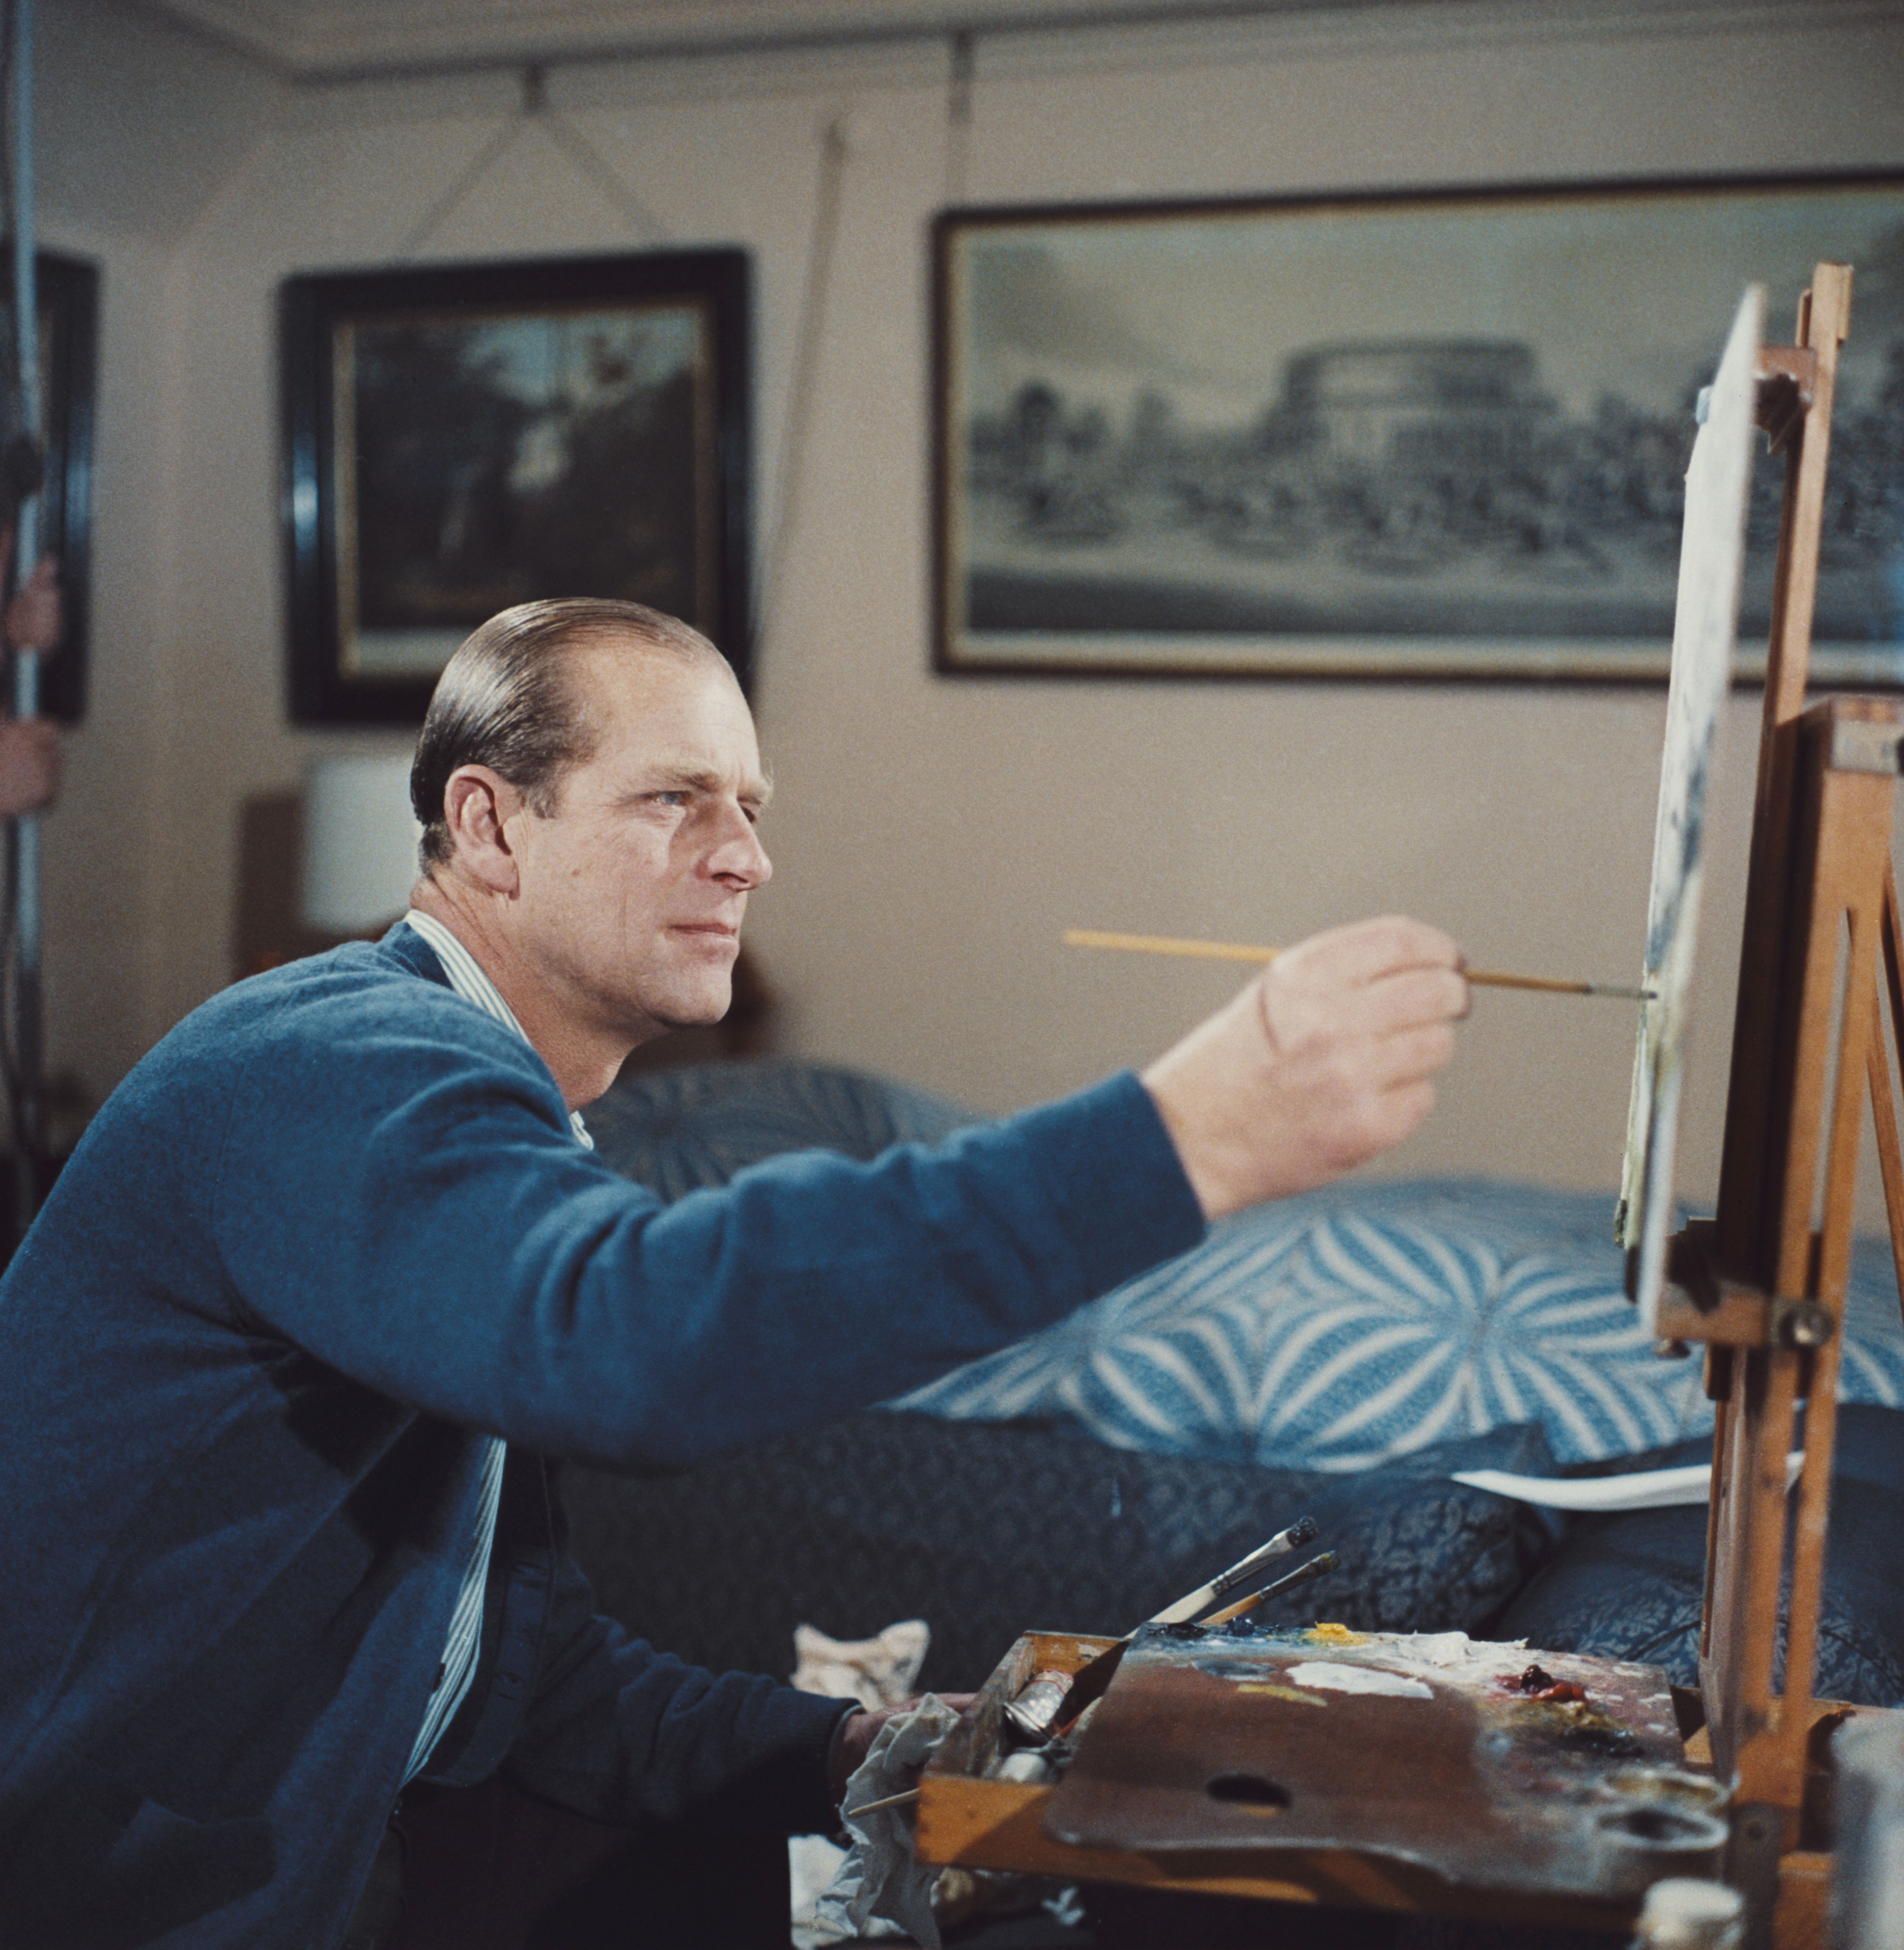 Prince Philip painting with oils during filming of the television documentary 'Royal Family' in London in 1969 | Source: Getty Images